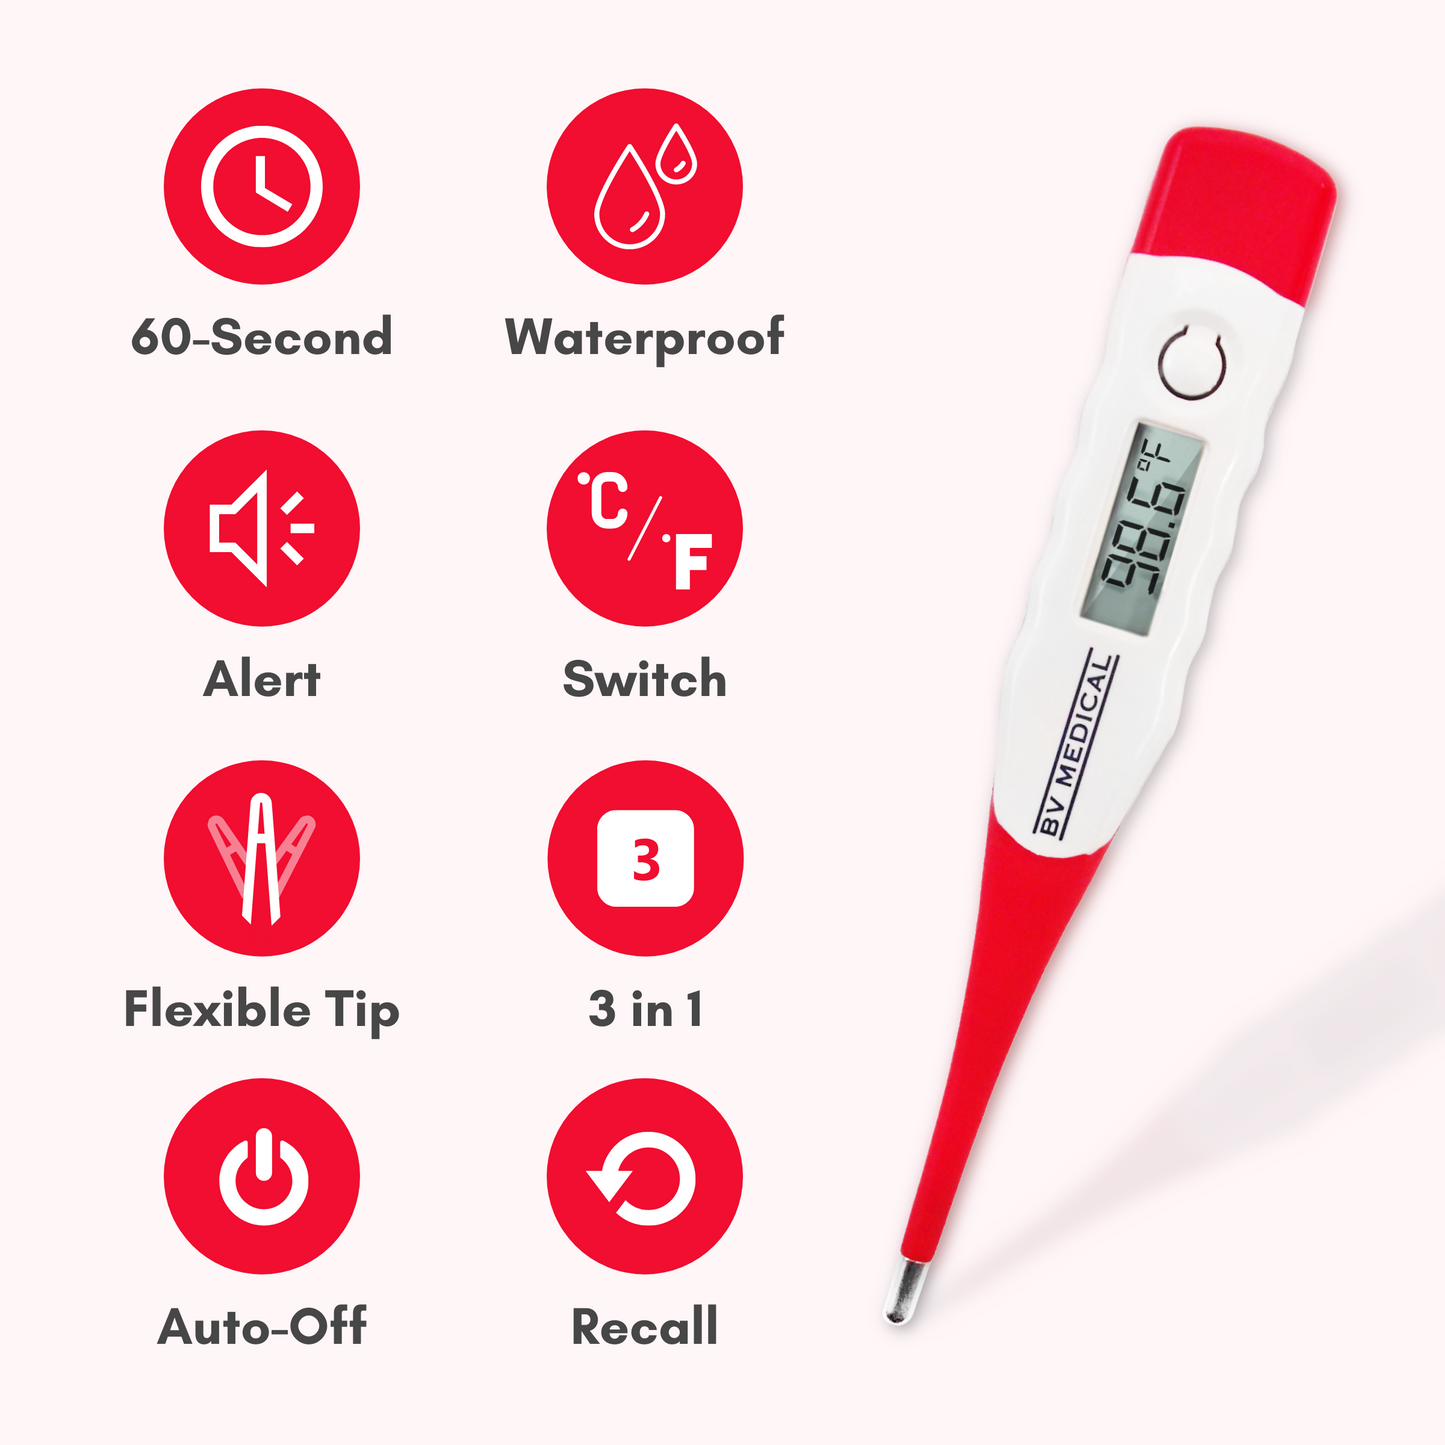 60-Second Waterproof Digital Thermometer with Flexible Tip